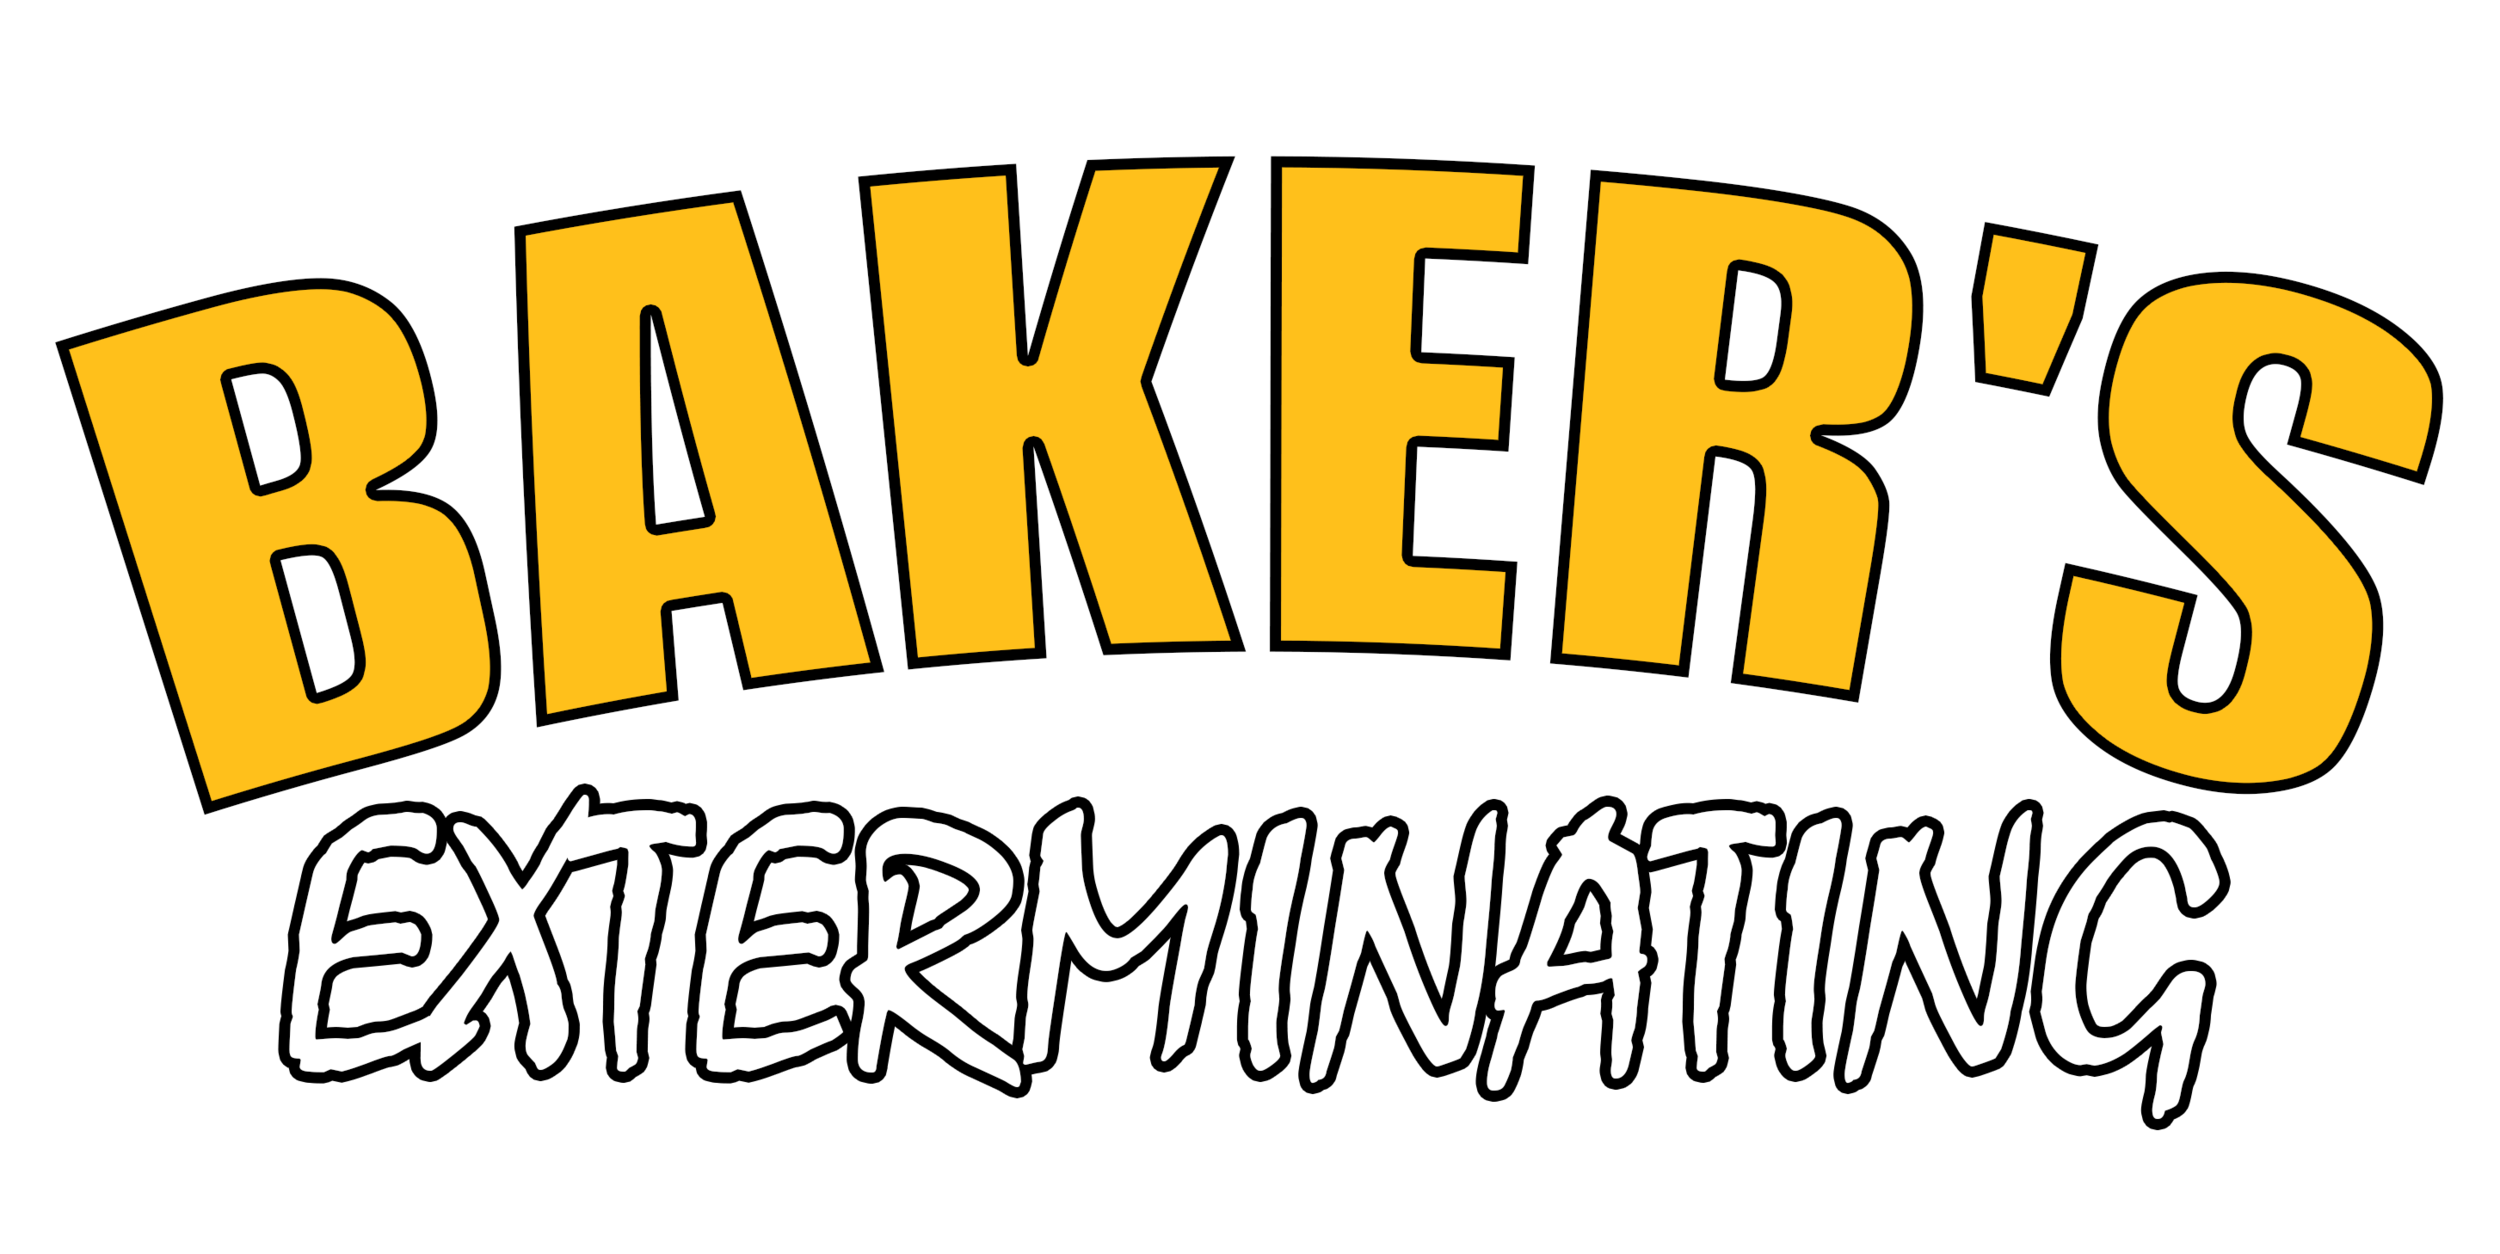  Bakers Exterminating